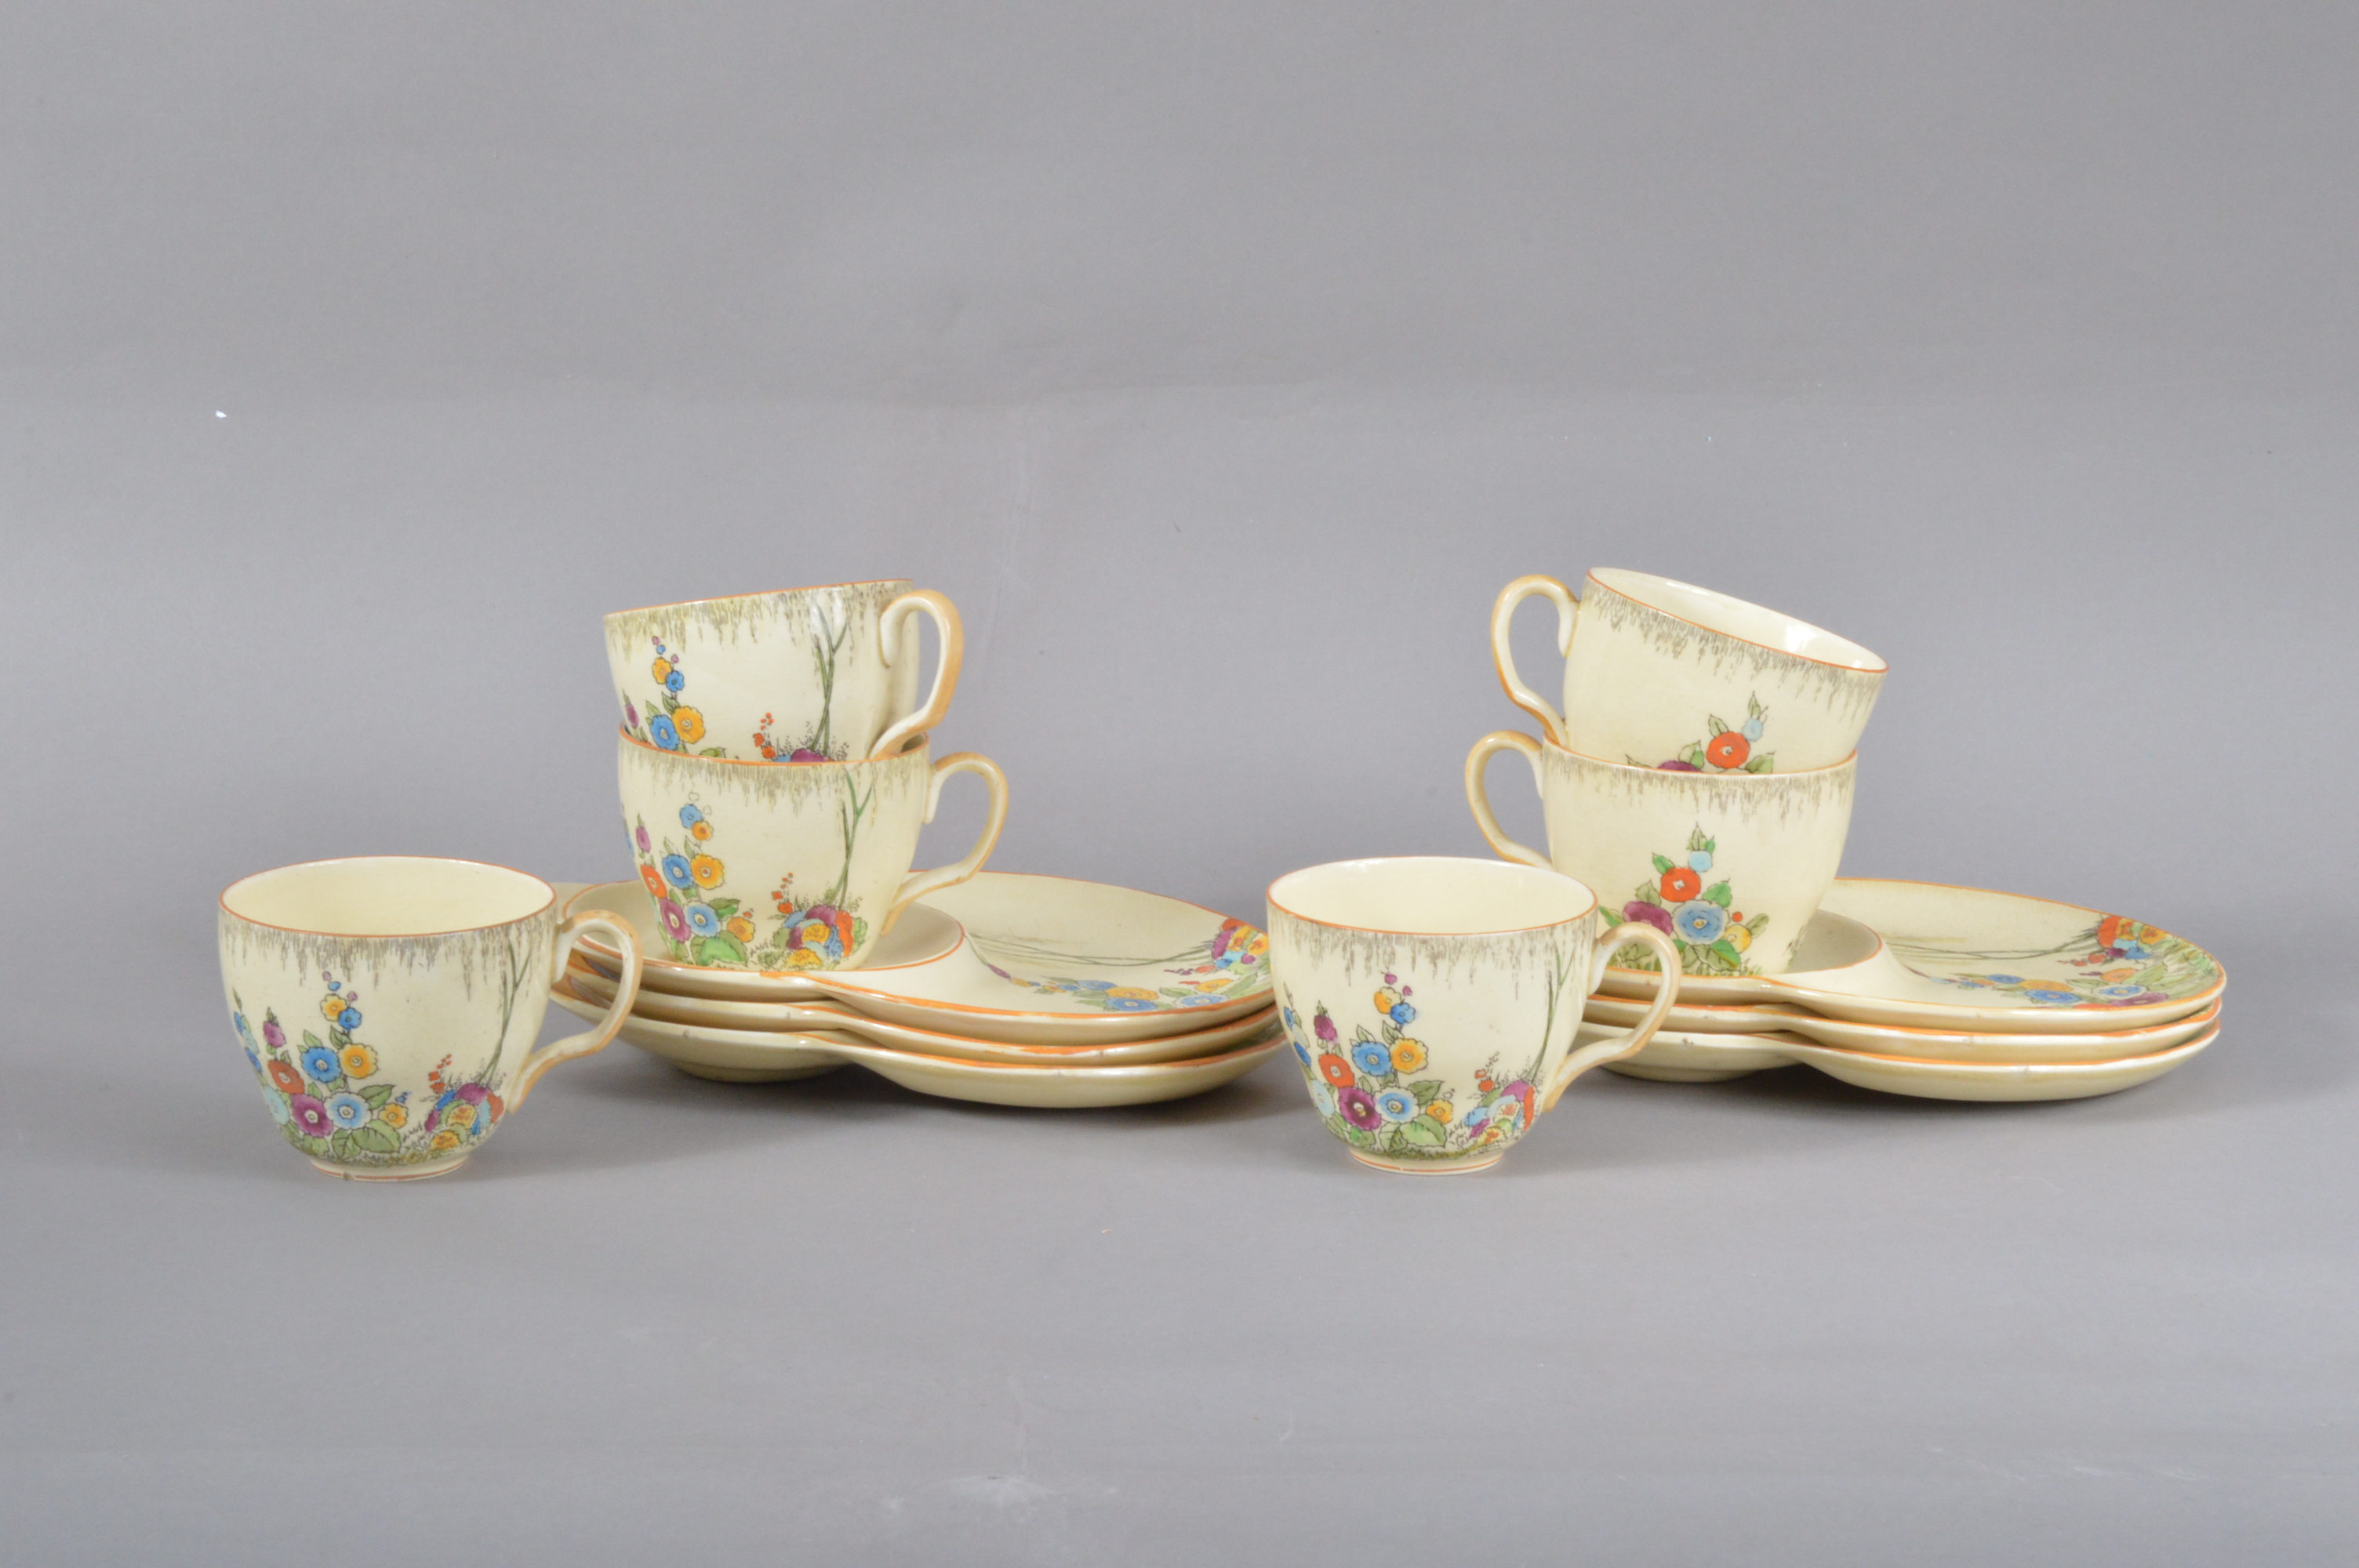 A set of six Crown Devon tea plates and cups, Summertime pattern, colourful decoration on a yellow/